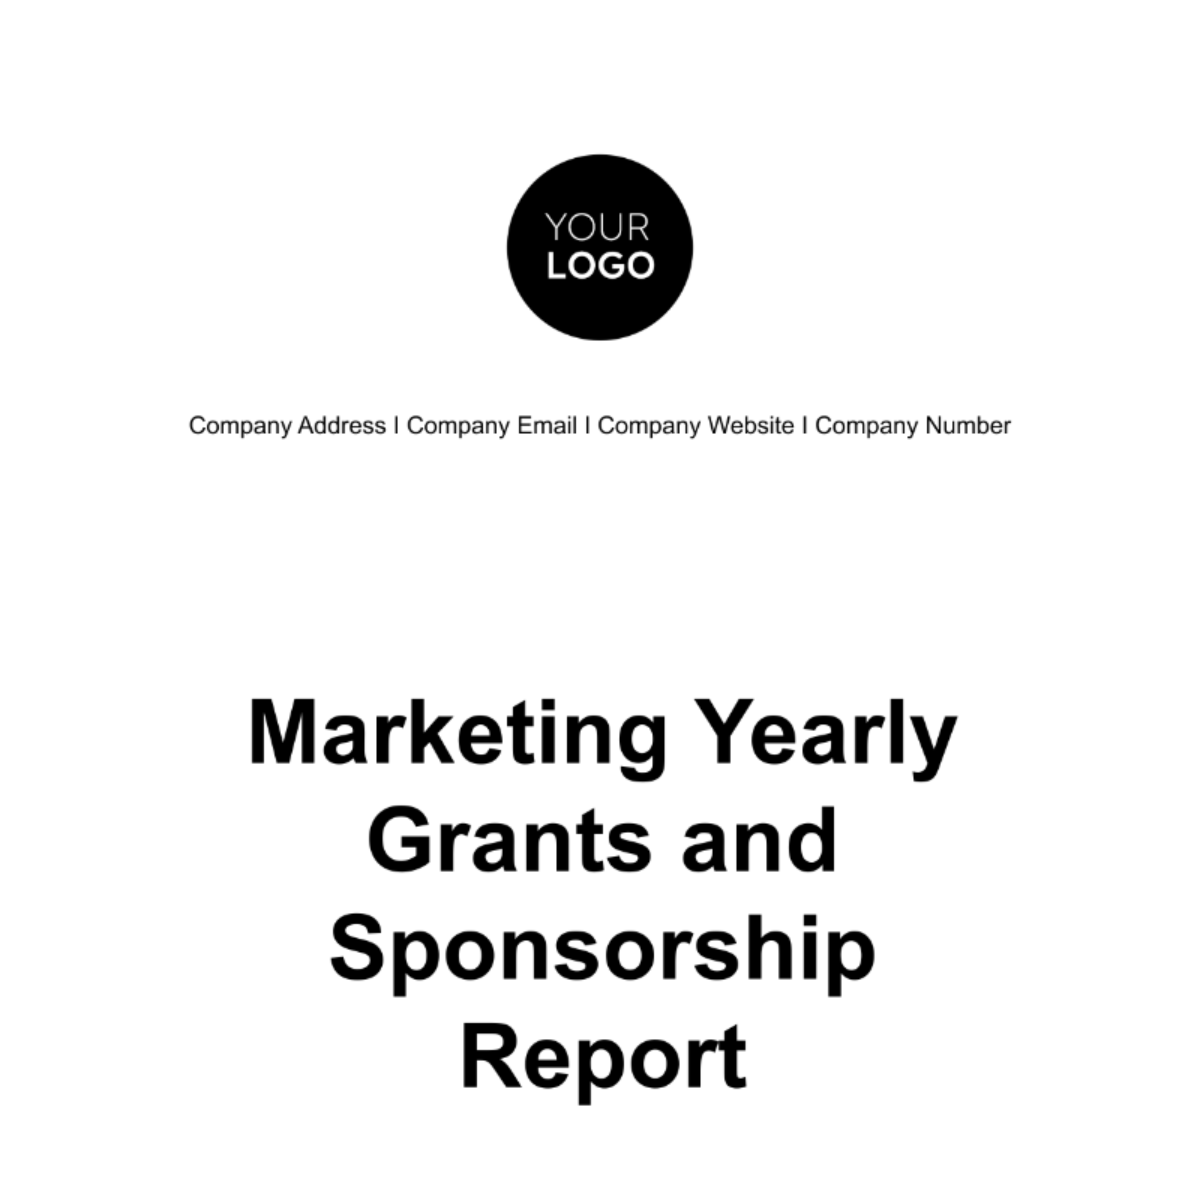 Free Marketing Yearly Grants and Sponsorship Report Template